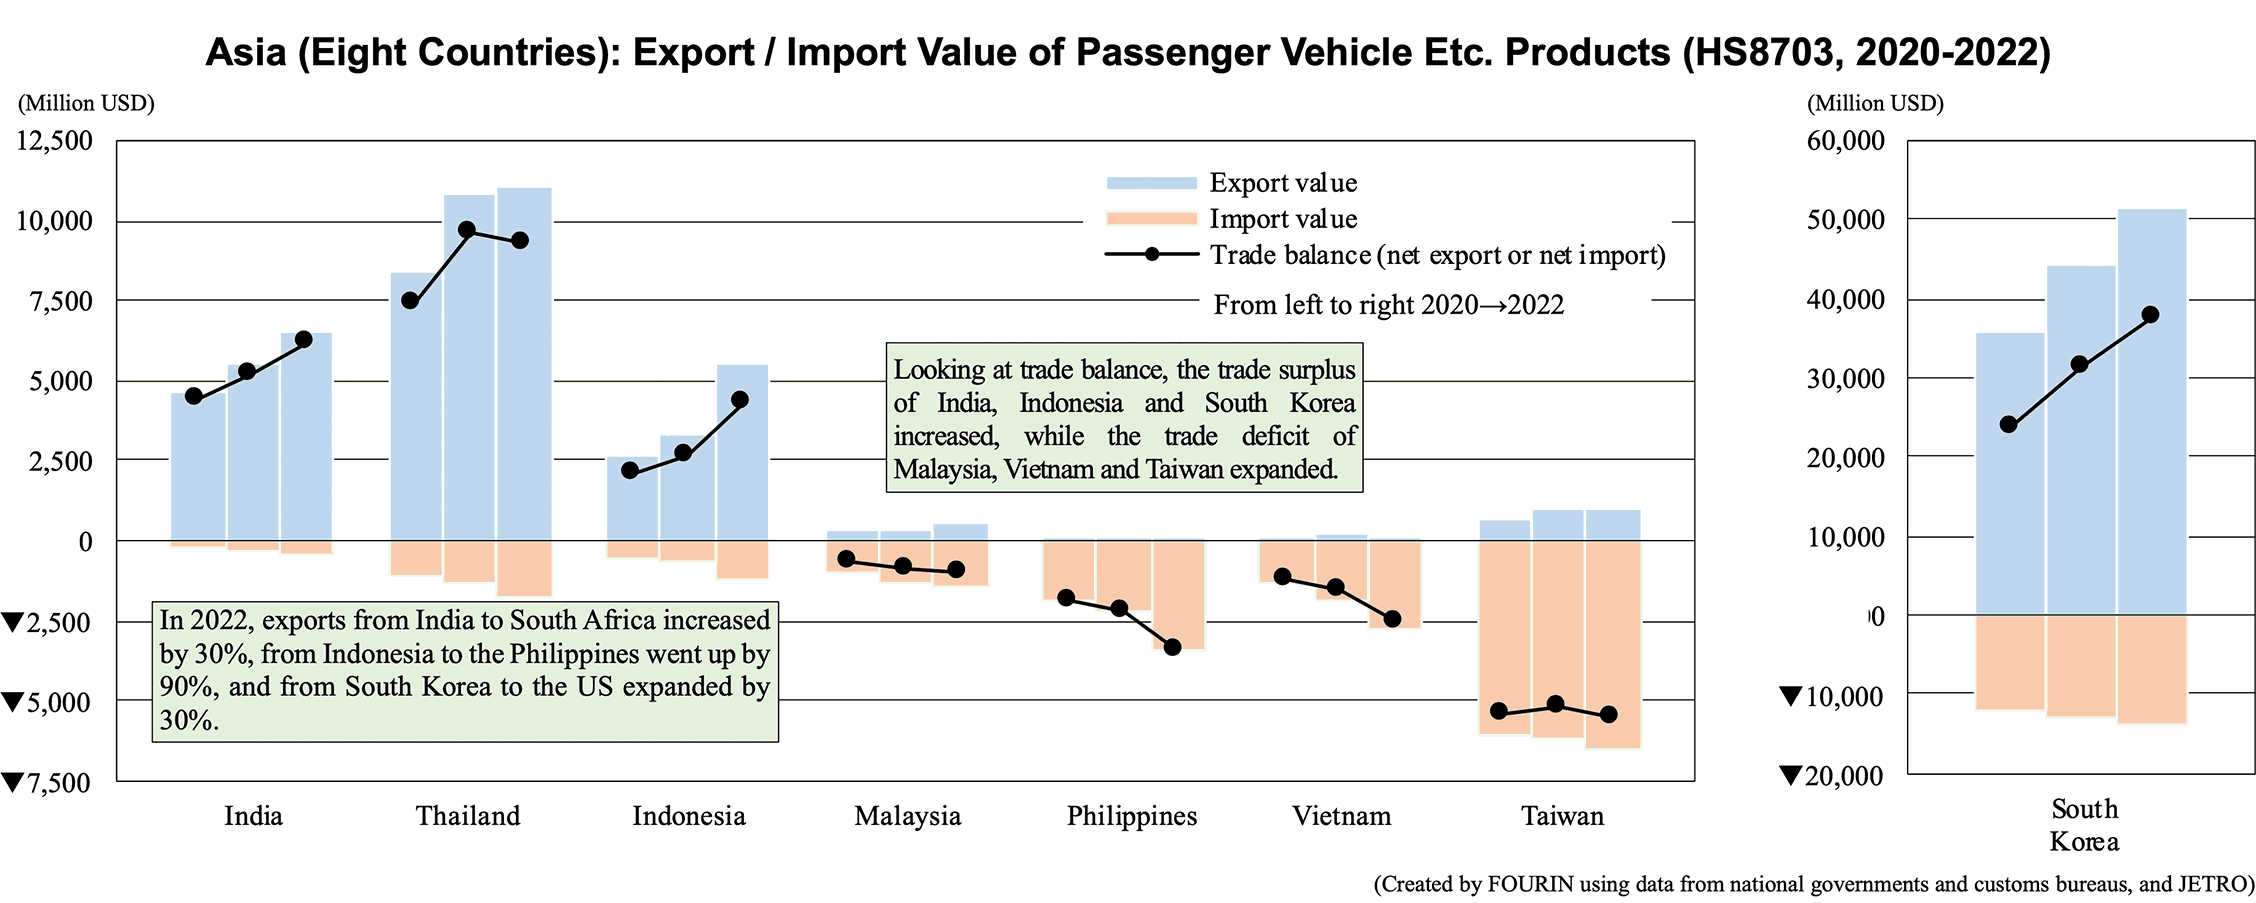 Graphs: Asia (Eight Countries): Export / Import Value of Passenger Vehicle Etc. Products (HS8703, 2018-2022)